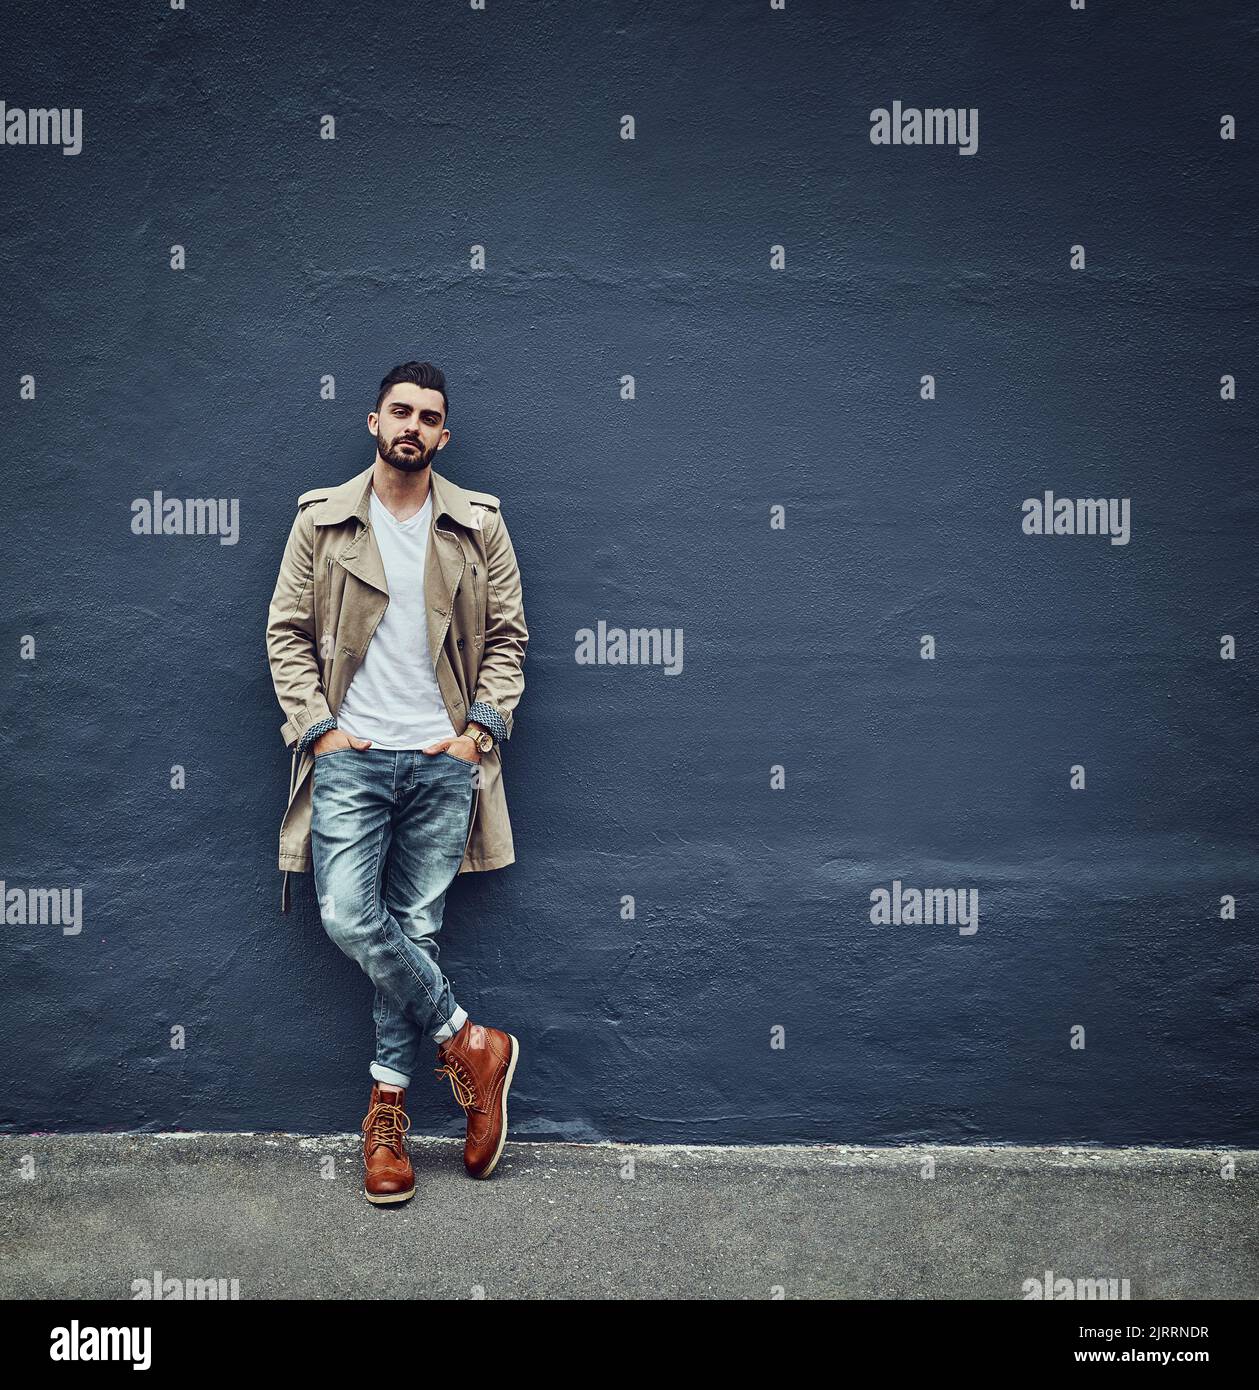 Streetwear done right. Portrait of a fashionable young man wearing urban wear and posing against a gray wall. Stock Photo